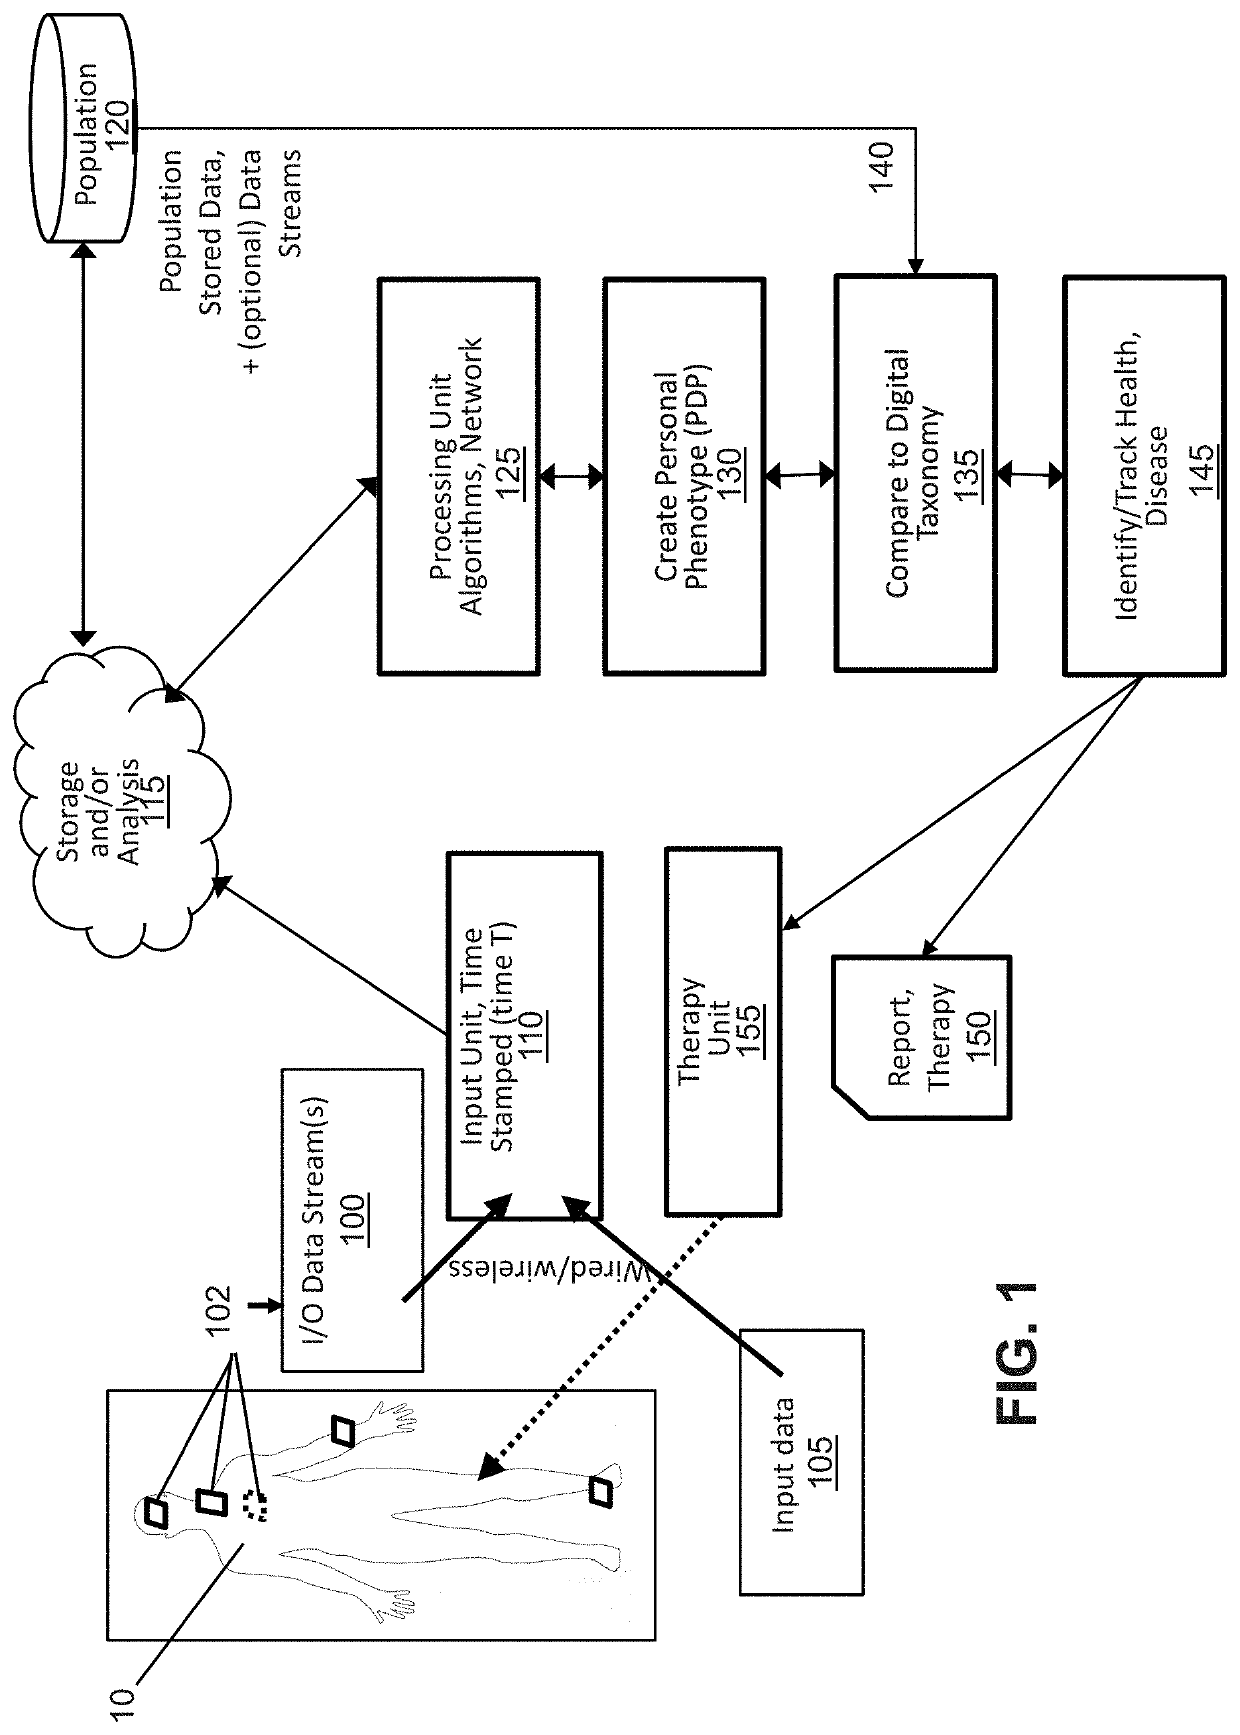 System and method to maintain health using personal digital phenotypes